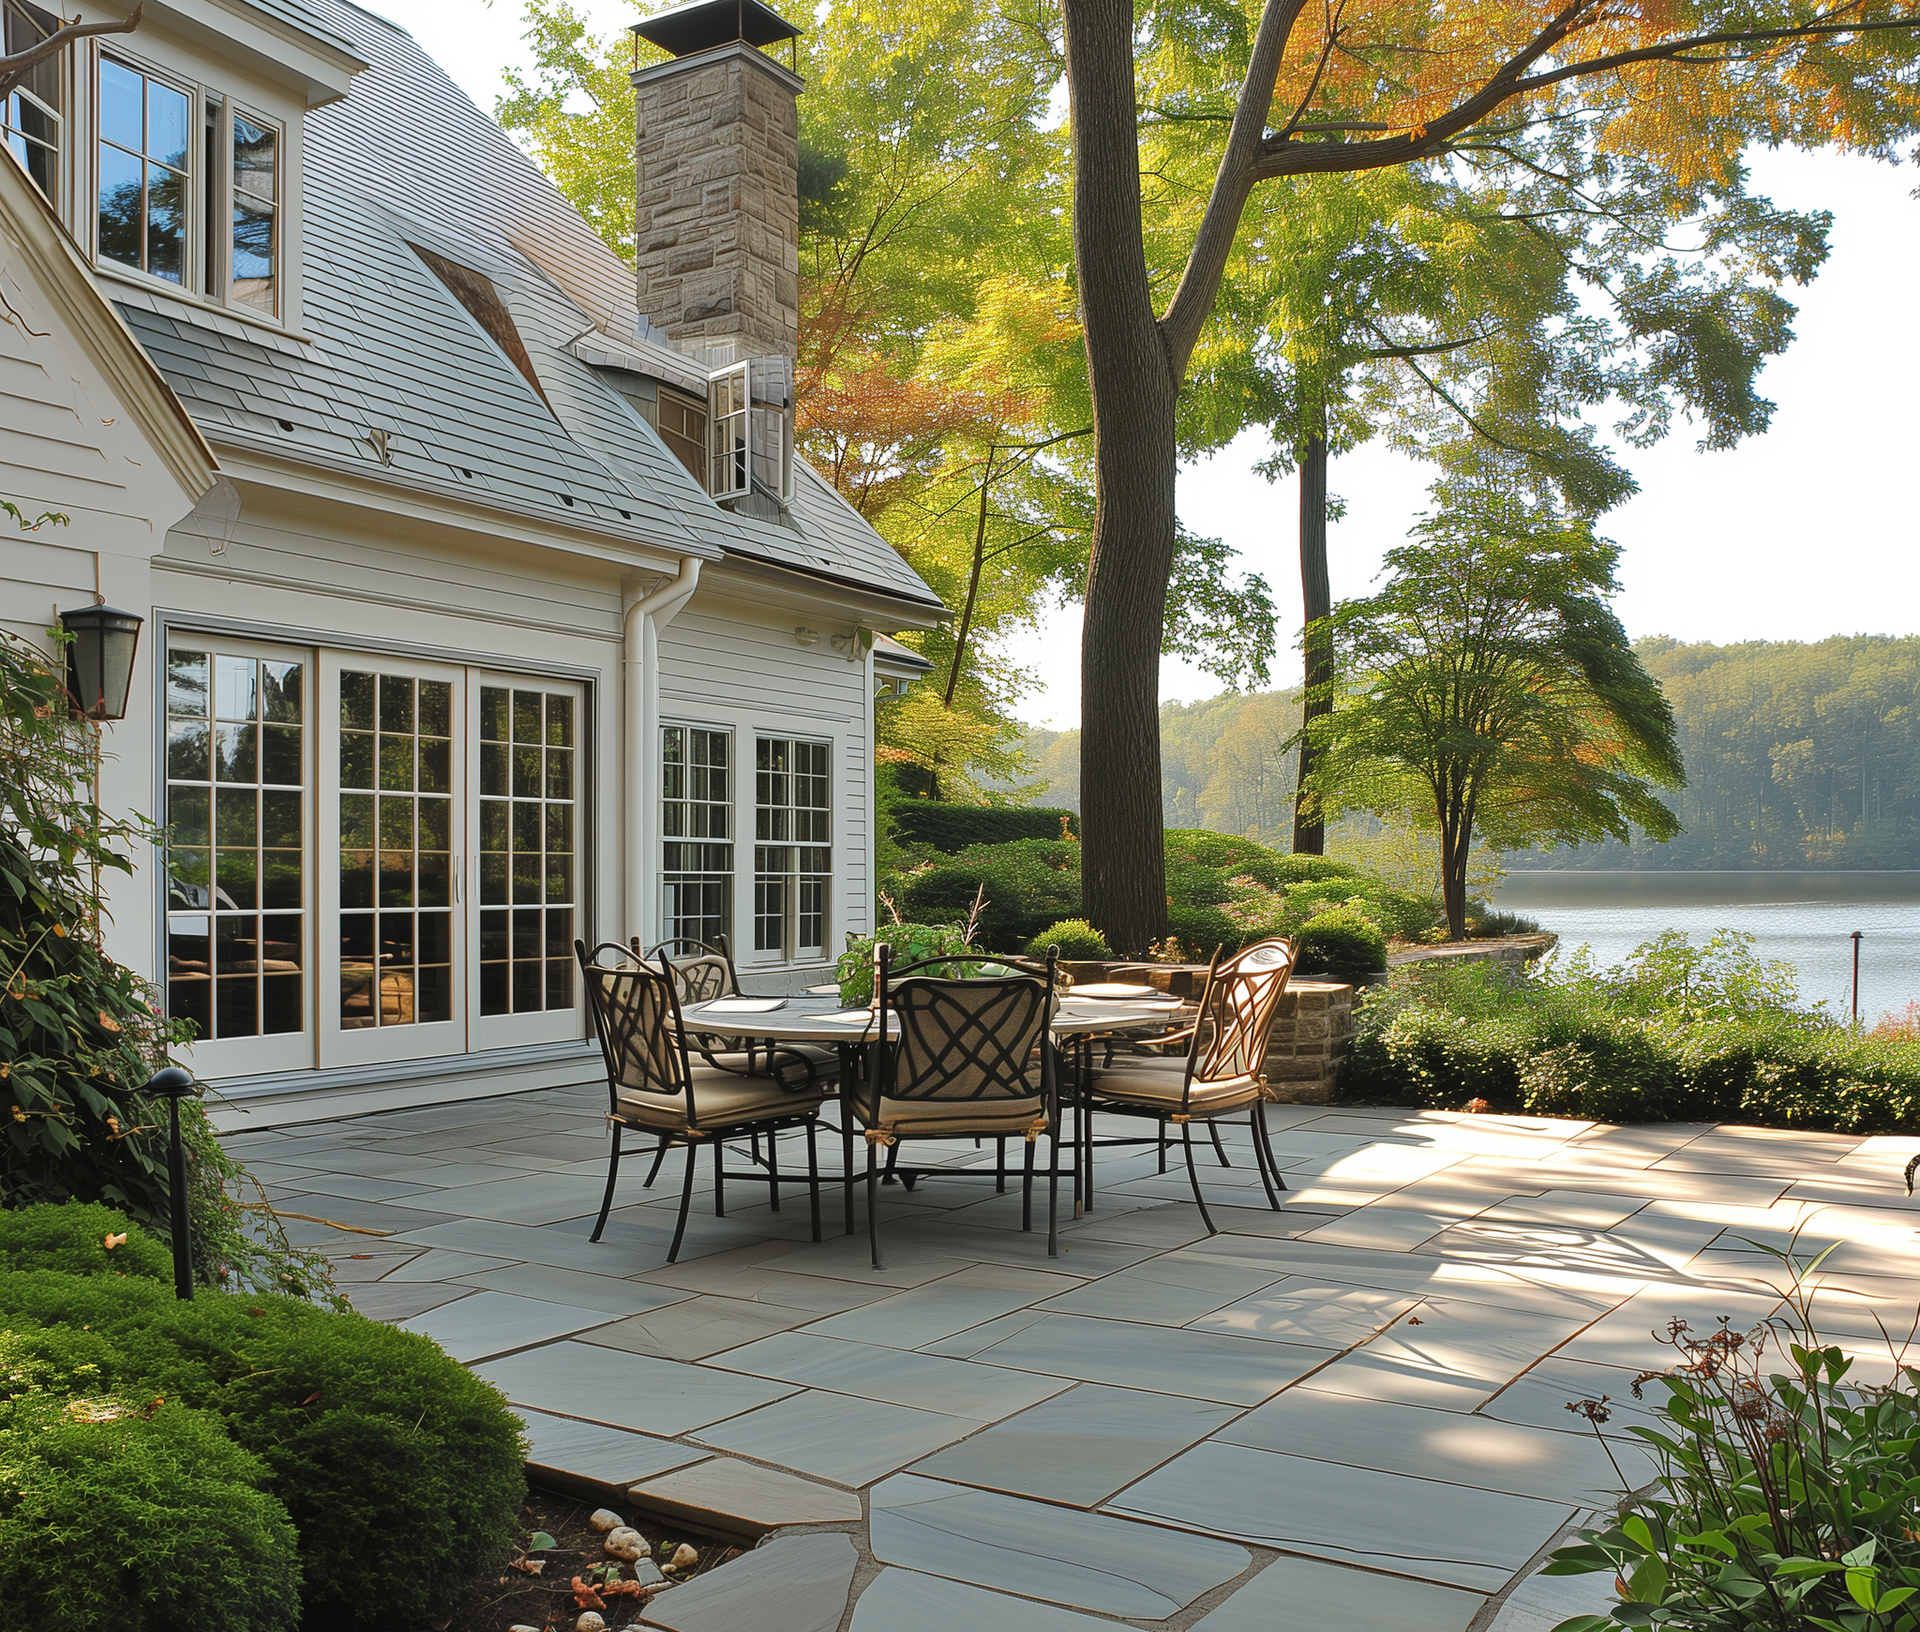 Say Hello to Your Dream Outdoor Space with This Handy Paver Patio Installation Guide